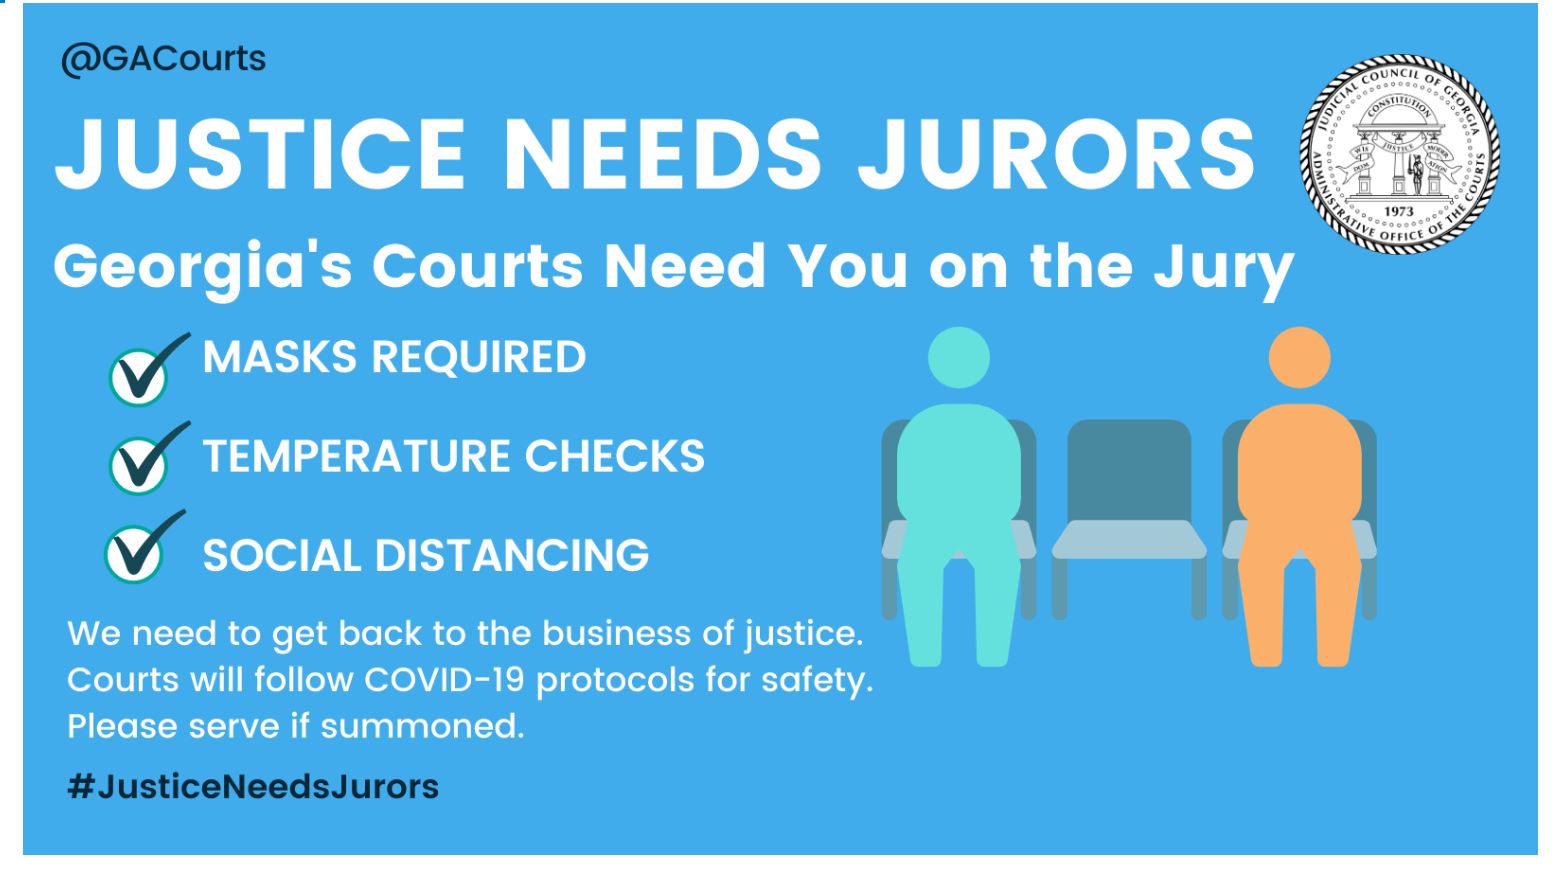 In a Tweet, @GACourts says that #JusticeNeedsJurors and asks Georgians to please serve on a jury if summoned.